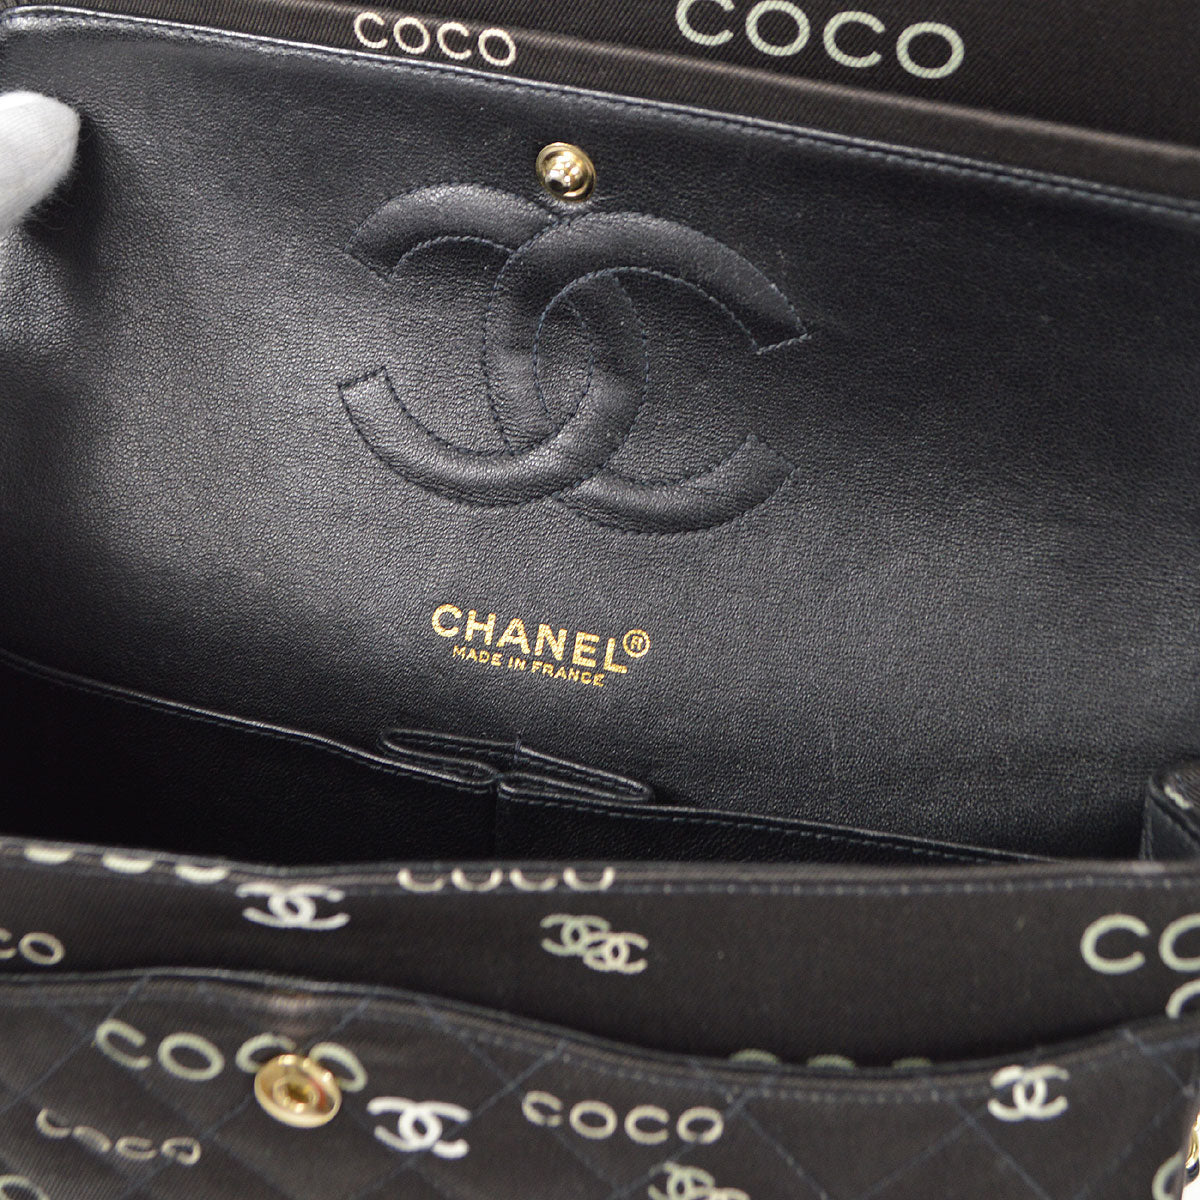 CHANEL 2001-2003 COCO patterned Classic Double Flap Medium Black Canva